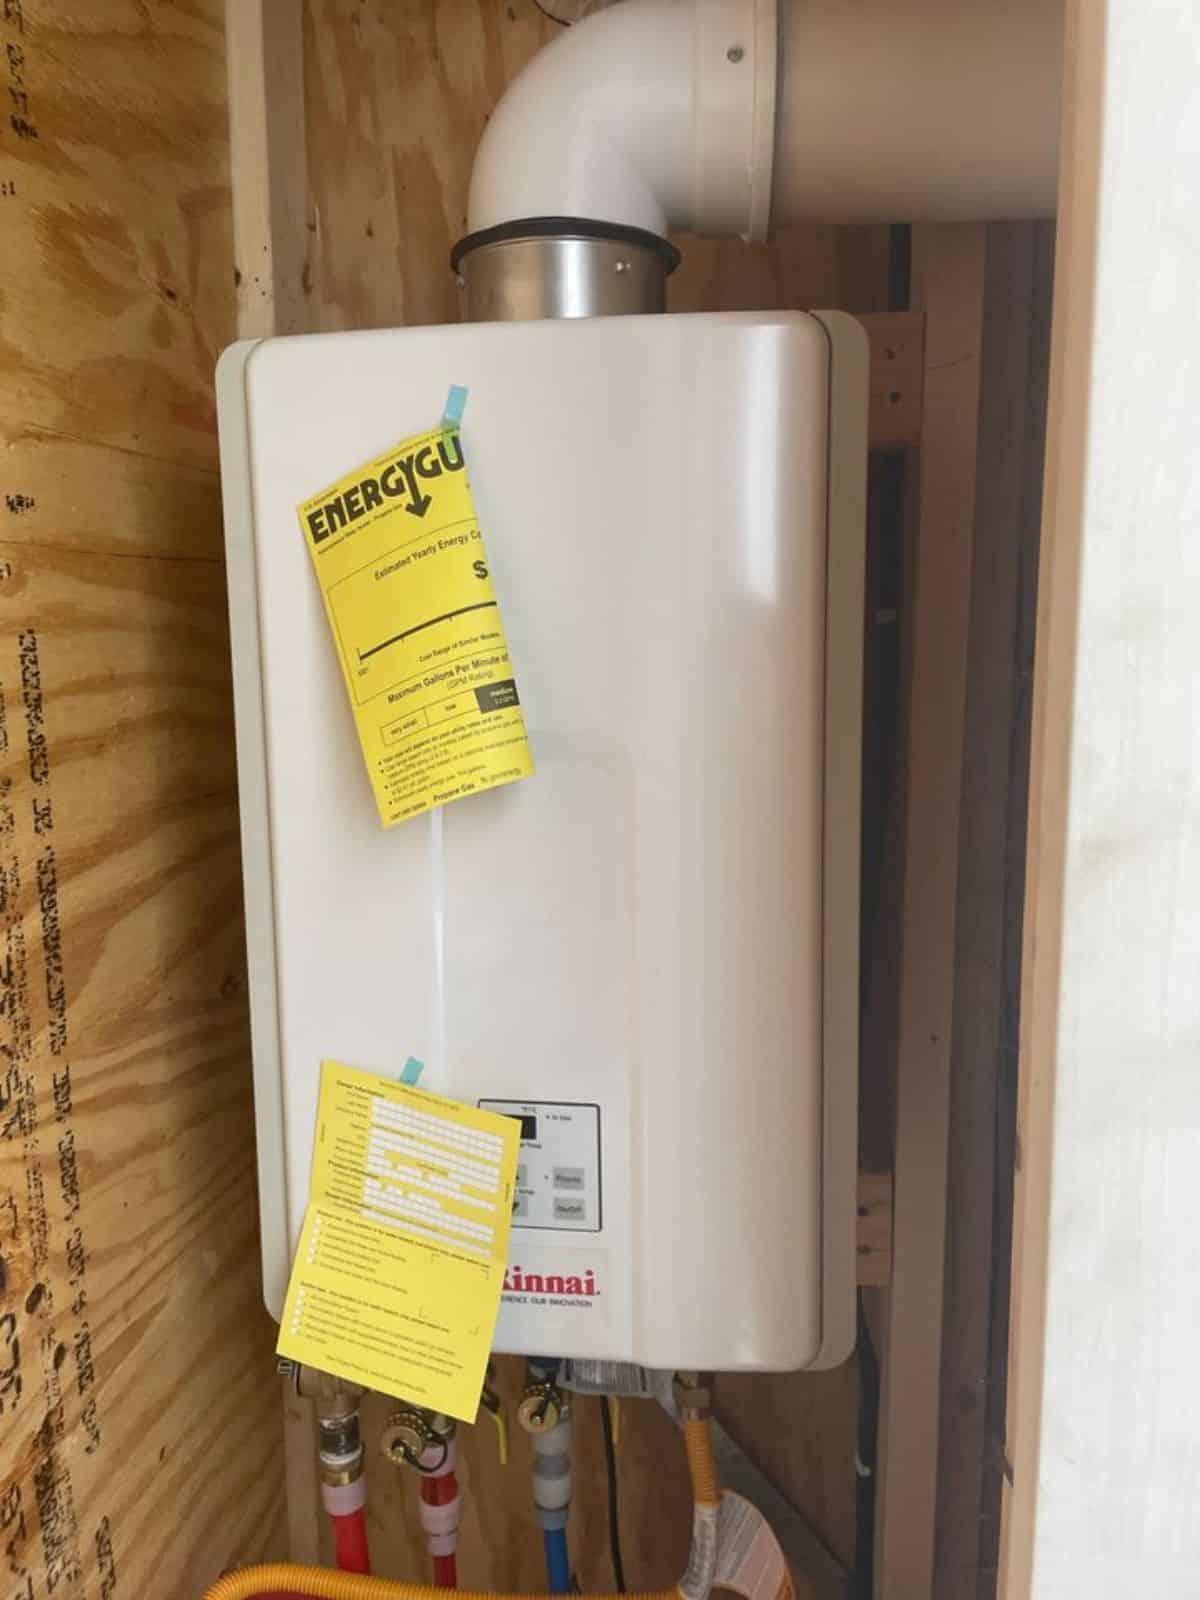 Hot water tank is also installed in the bathroom